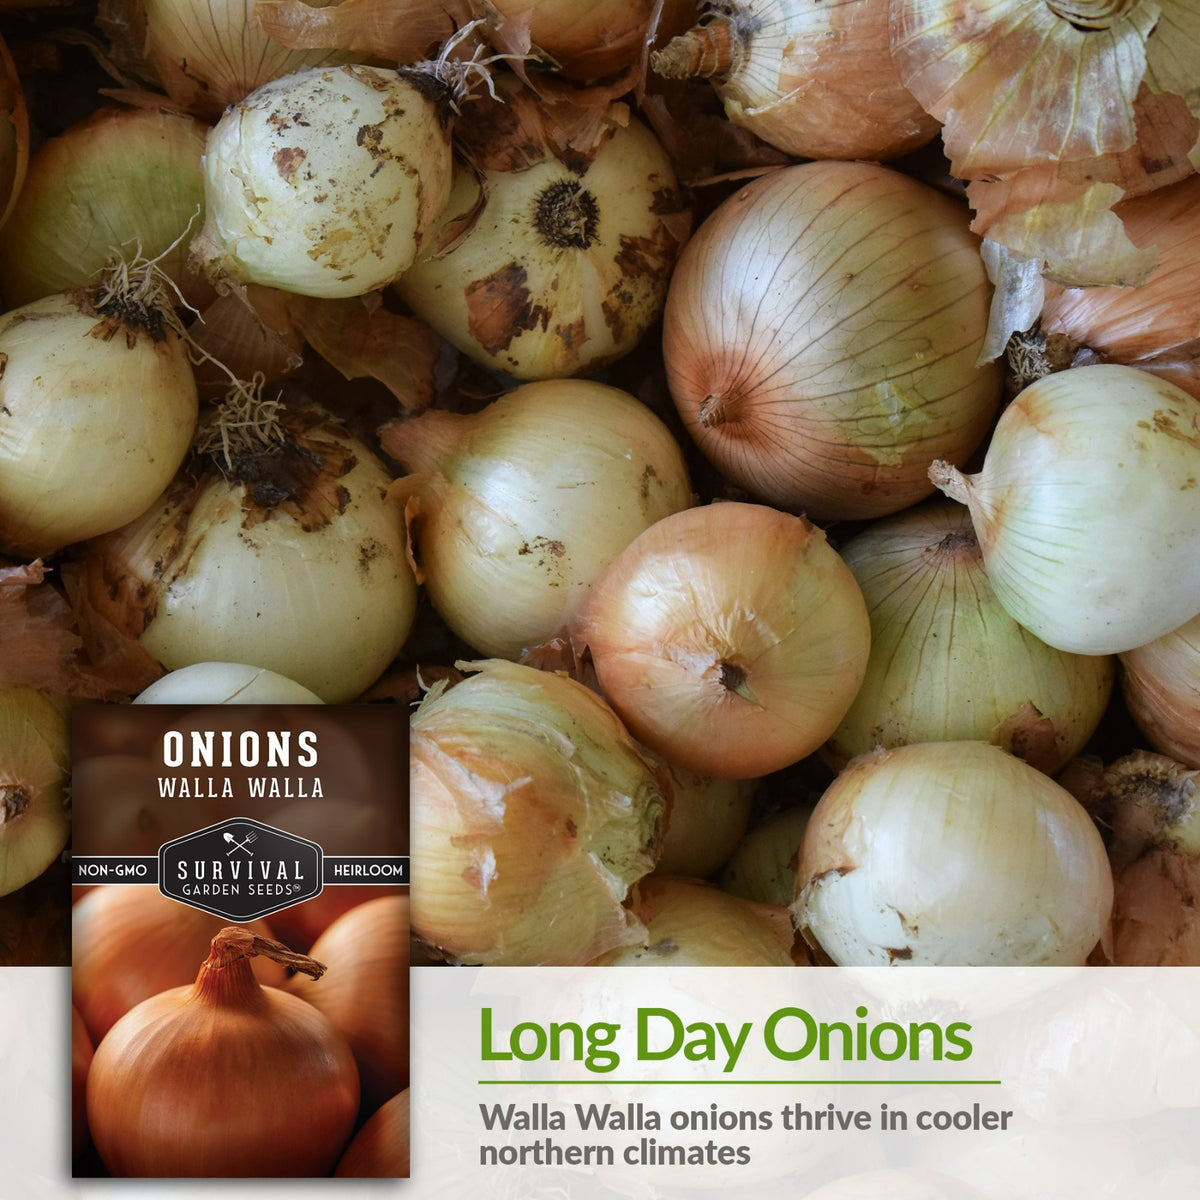 Walla Walla are long day onions that thrive in cooler climates